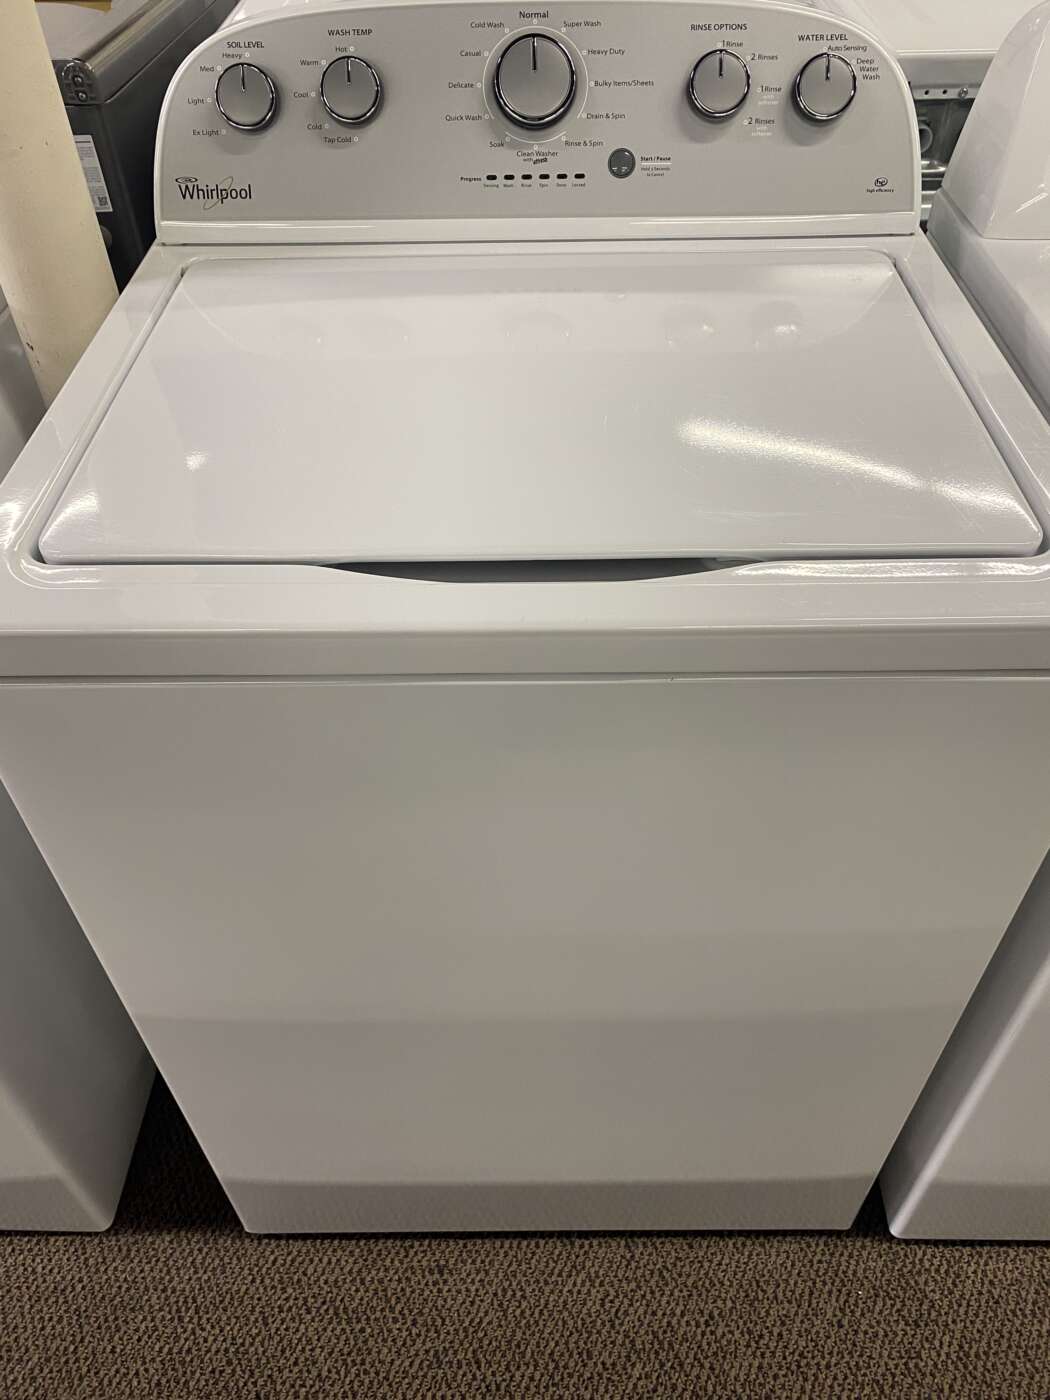 Reconditioned WHIRLPOOL 4.3 Cu. Ft. H/E Top Load Washer